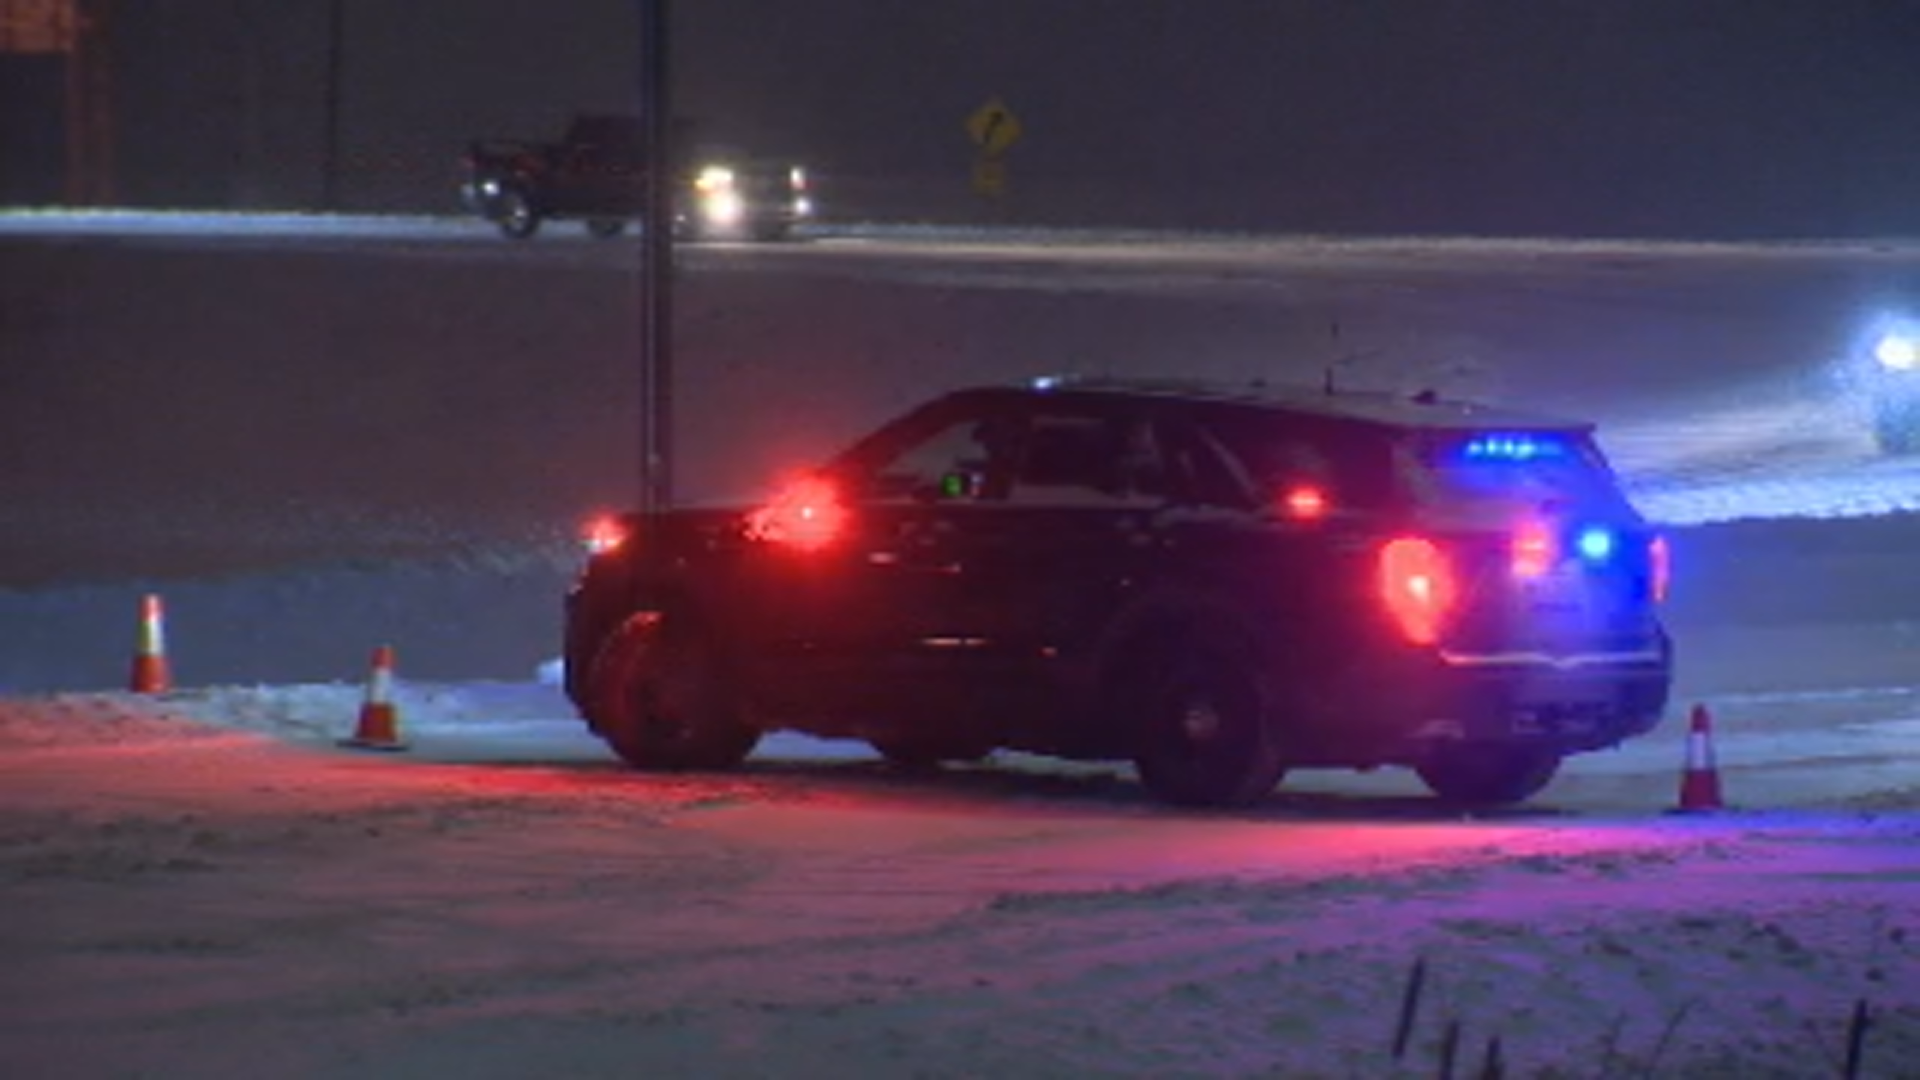 A police vehicle near the scene of a crash on the South Perimeter Monday night.